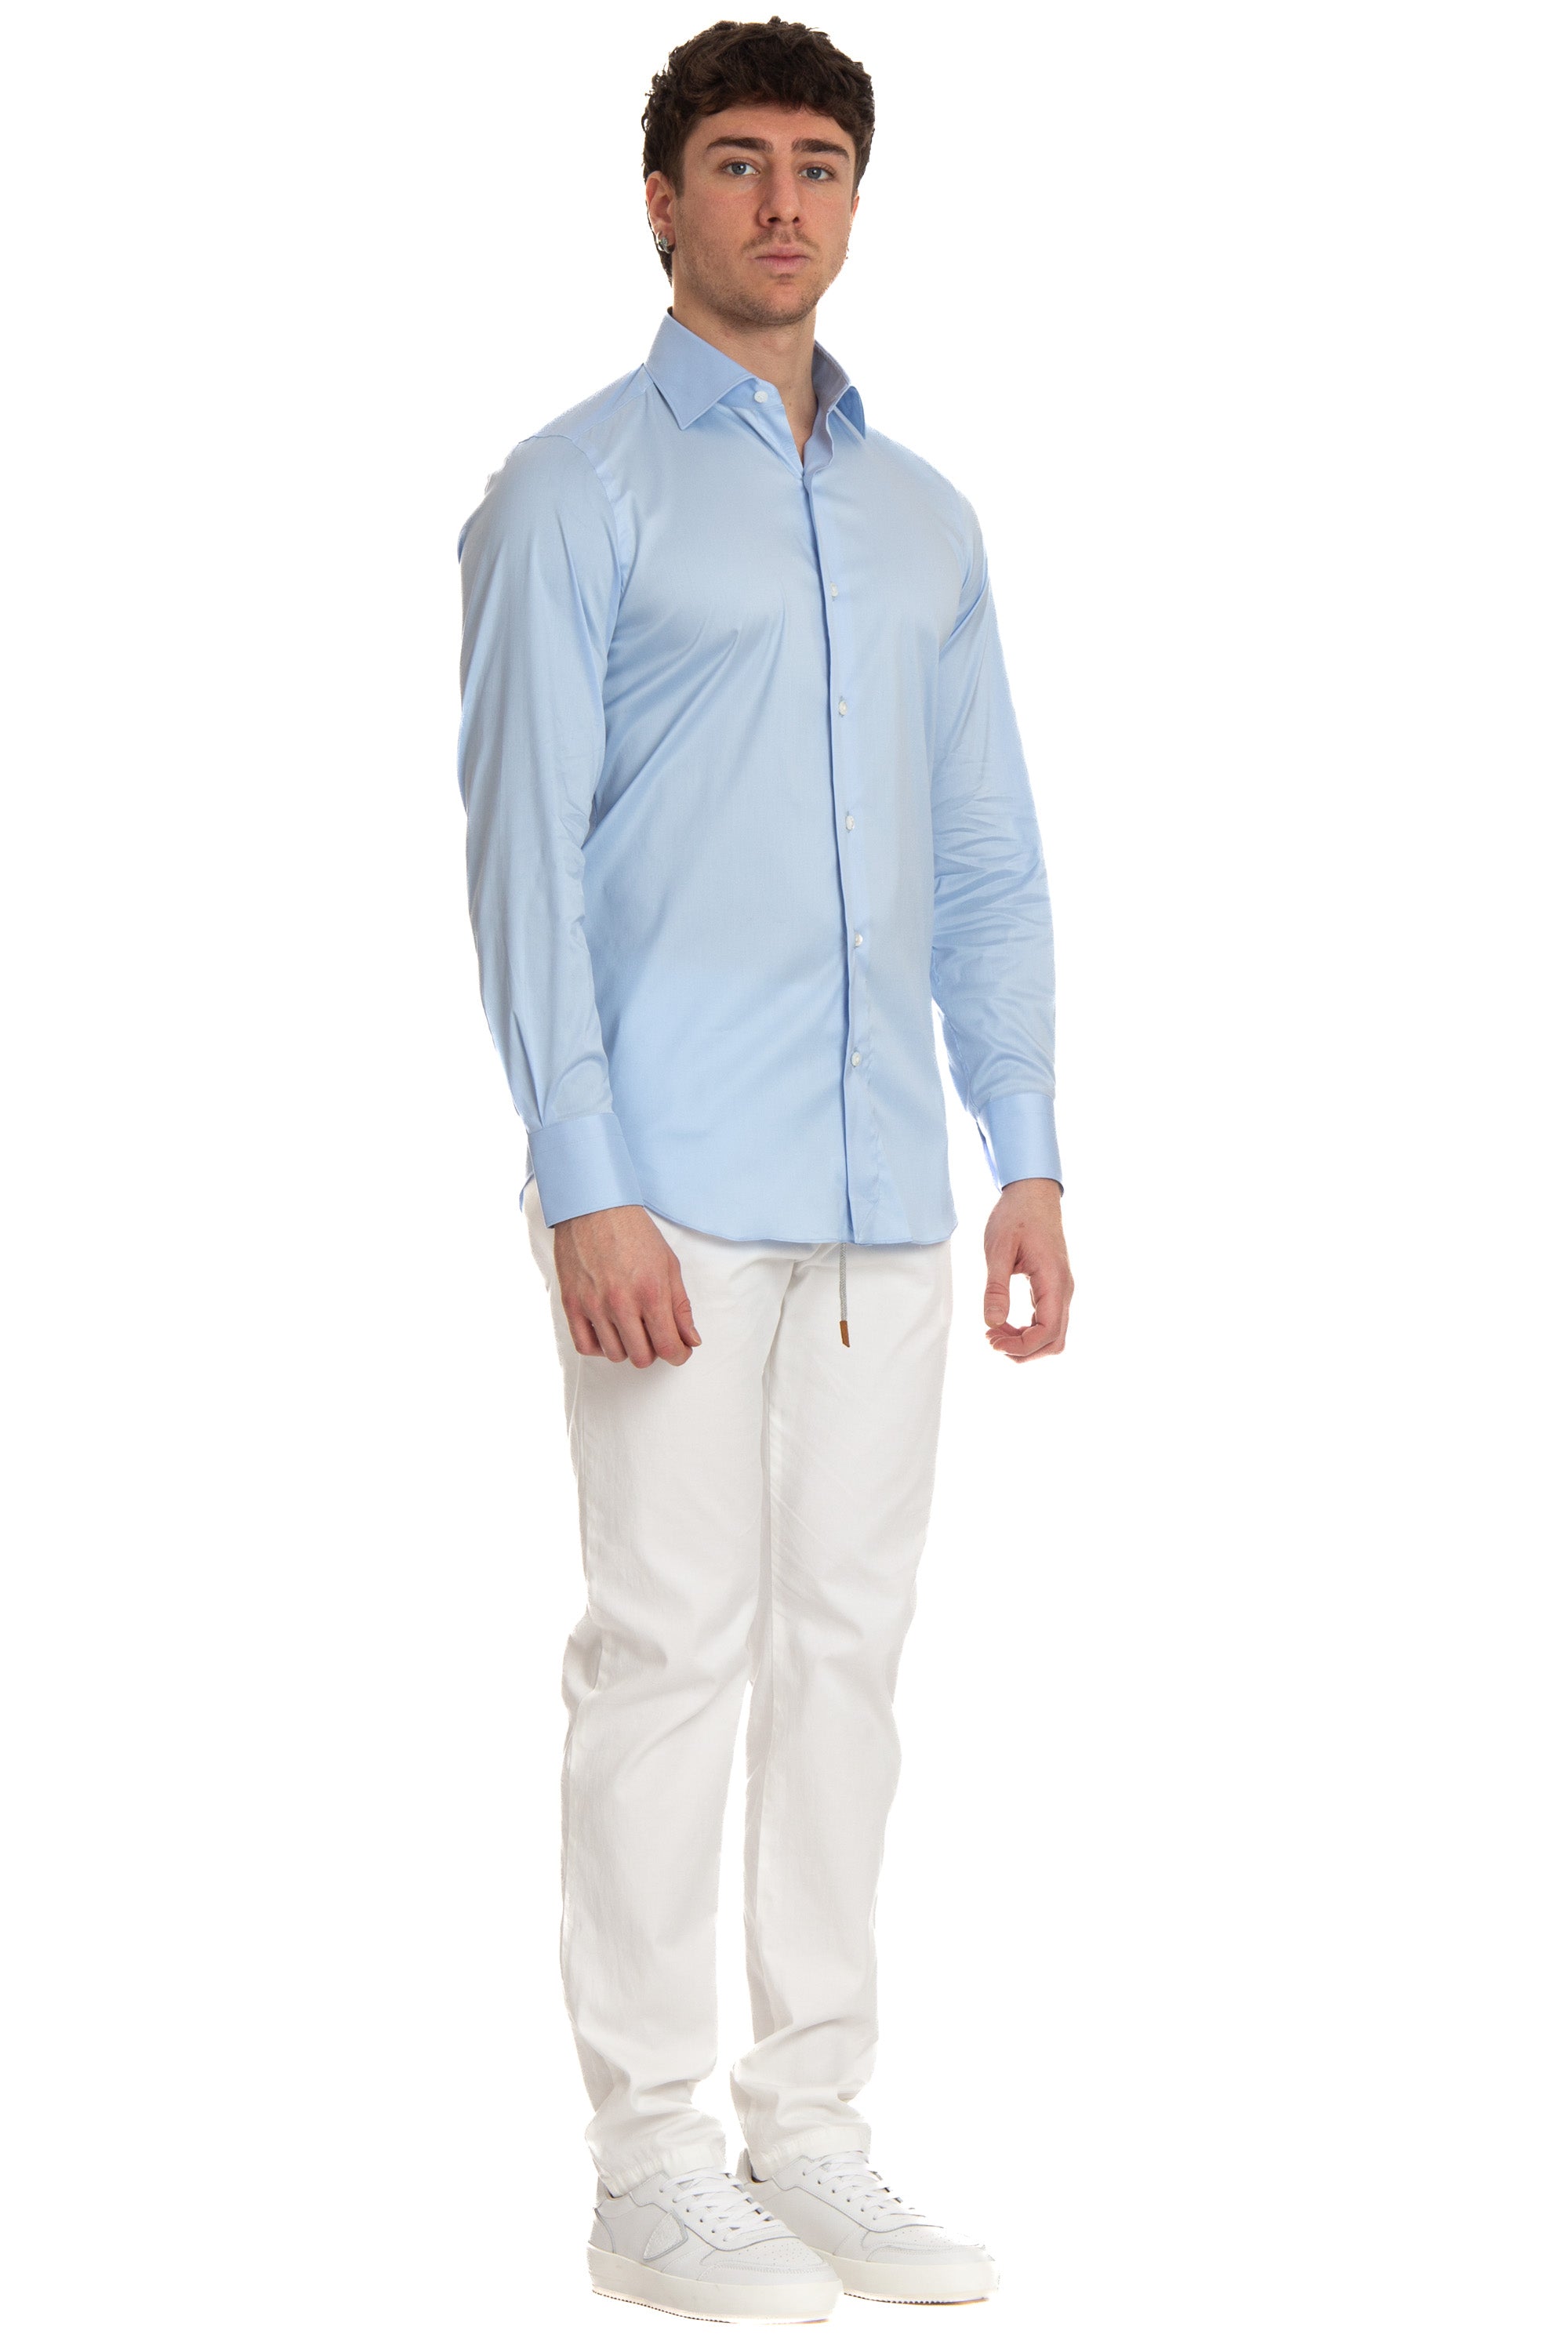 Tailored stretch poplin shirt from the Milan line